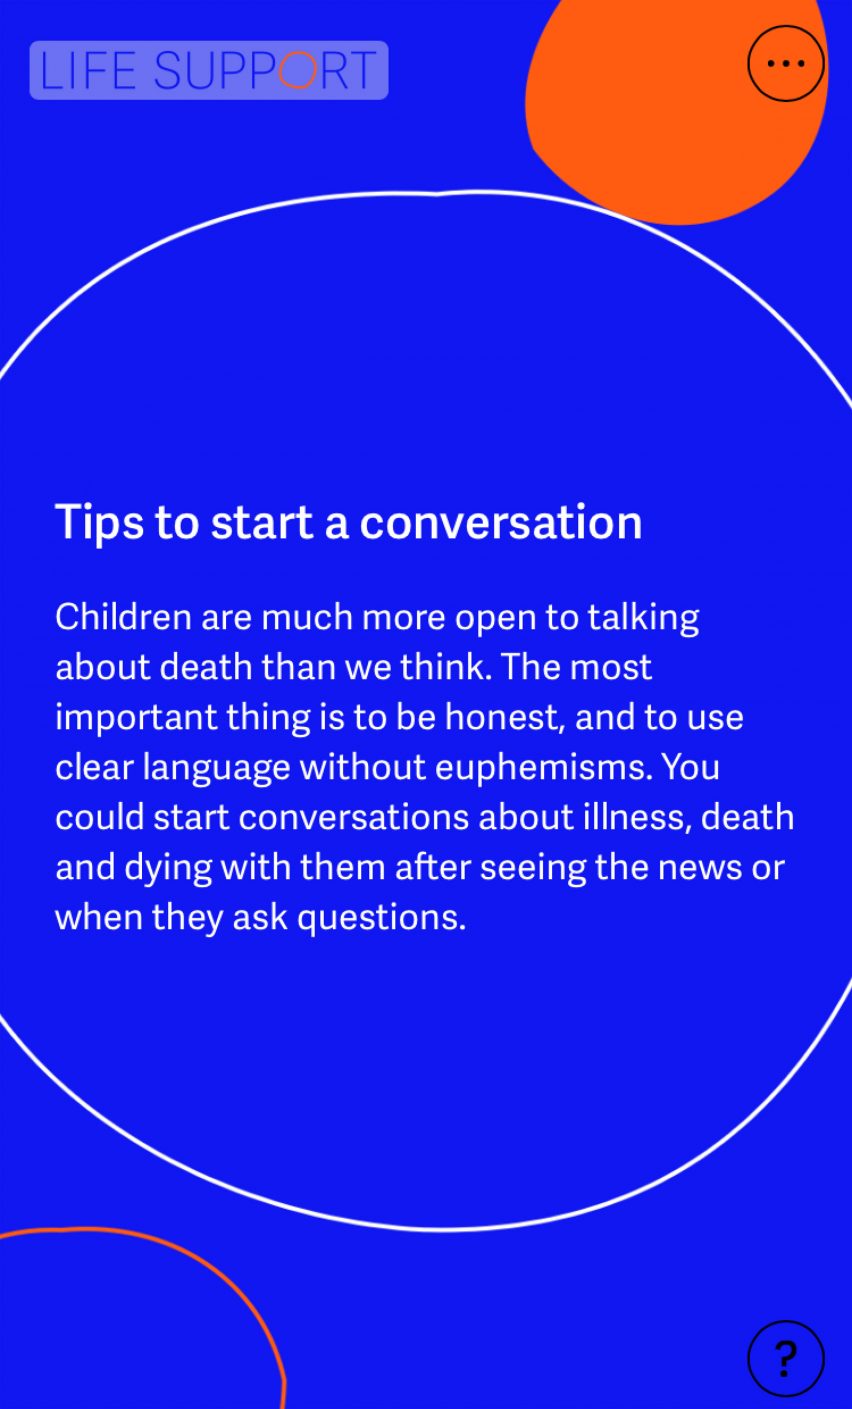 Tips to start a conversation with children about end of life